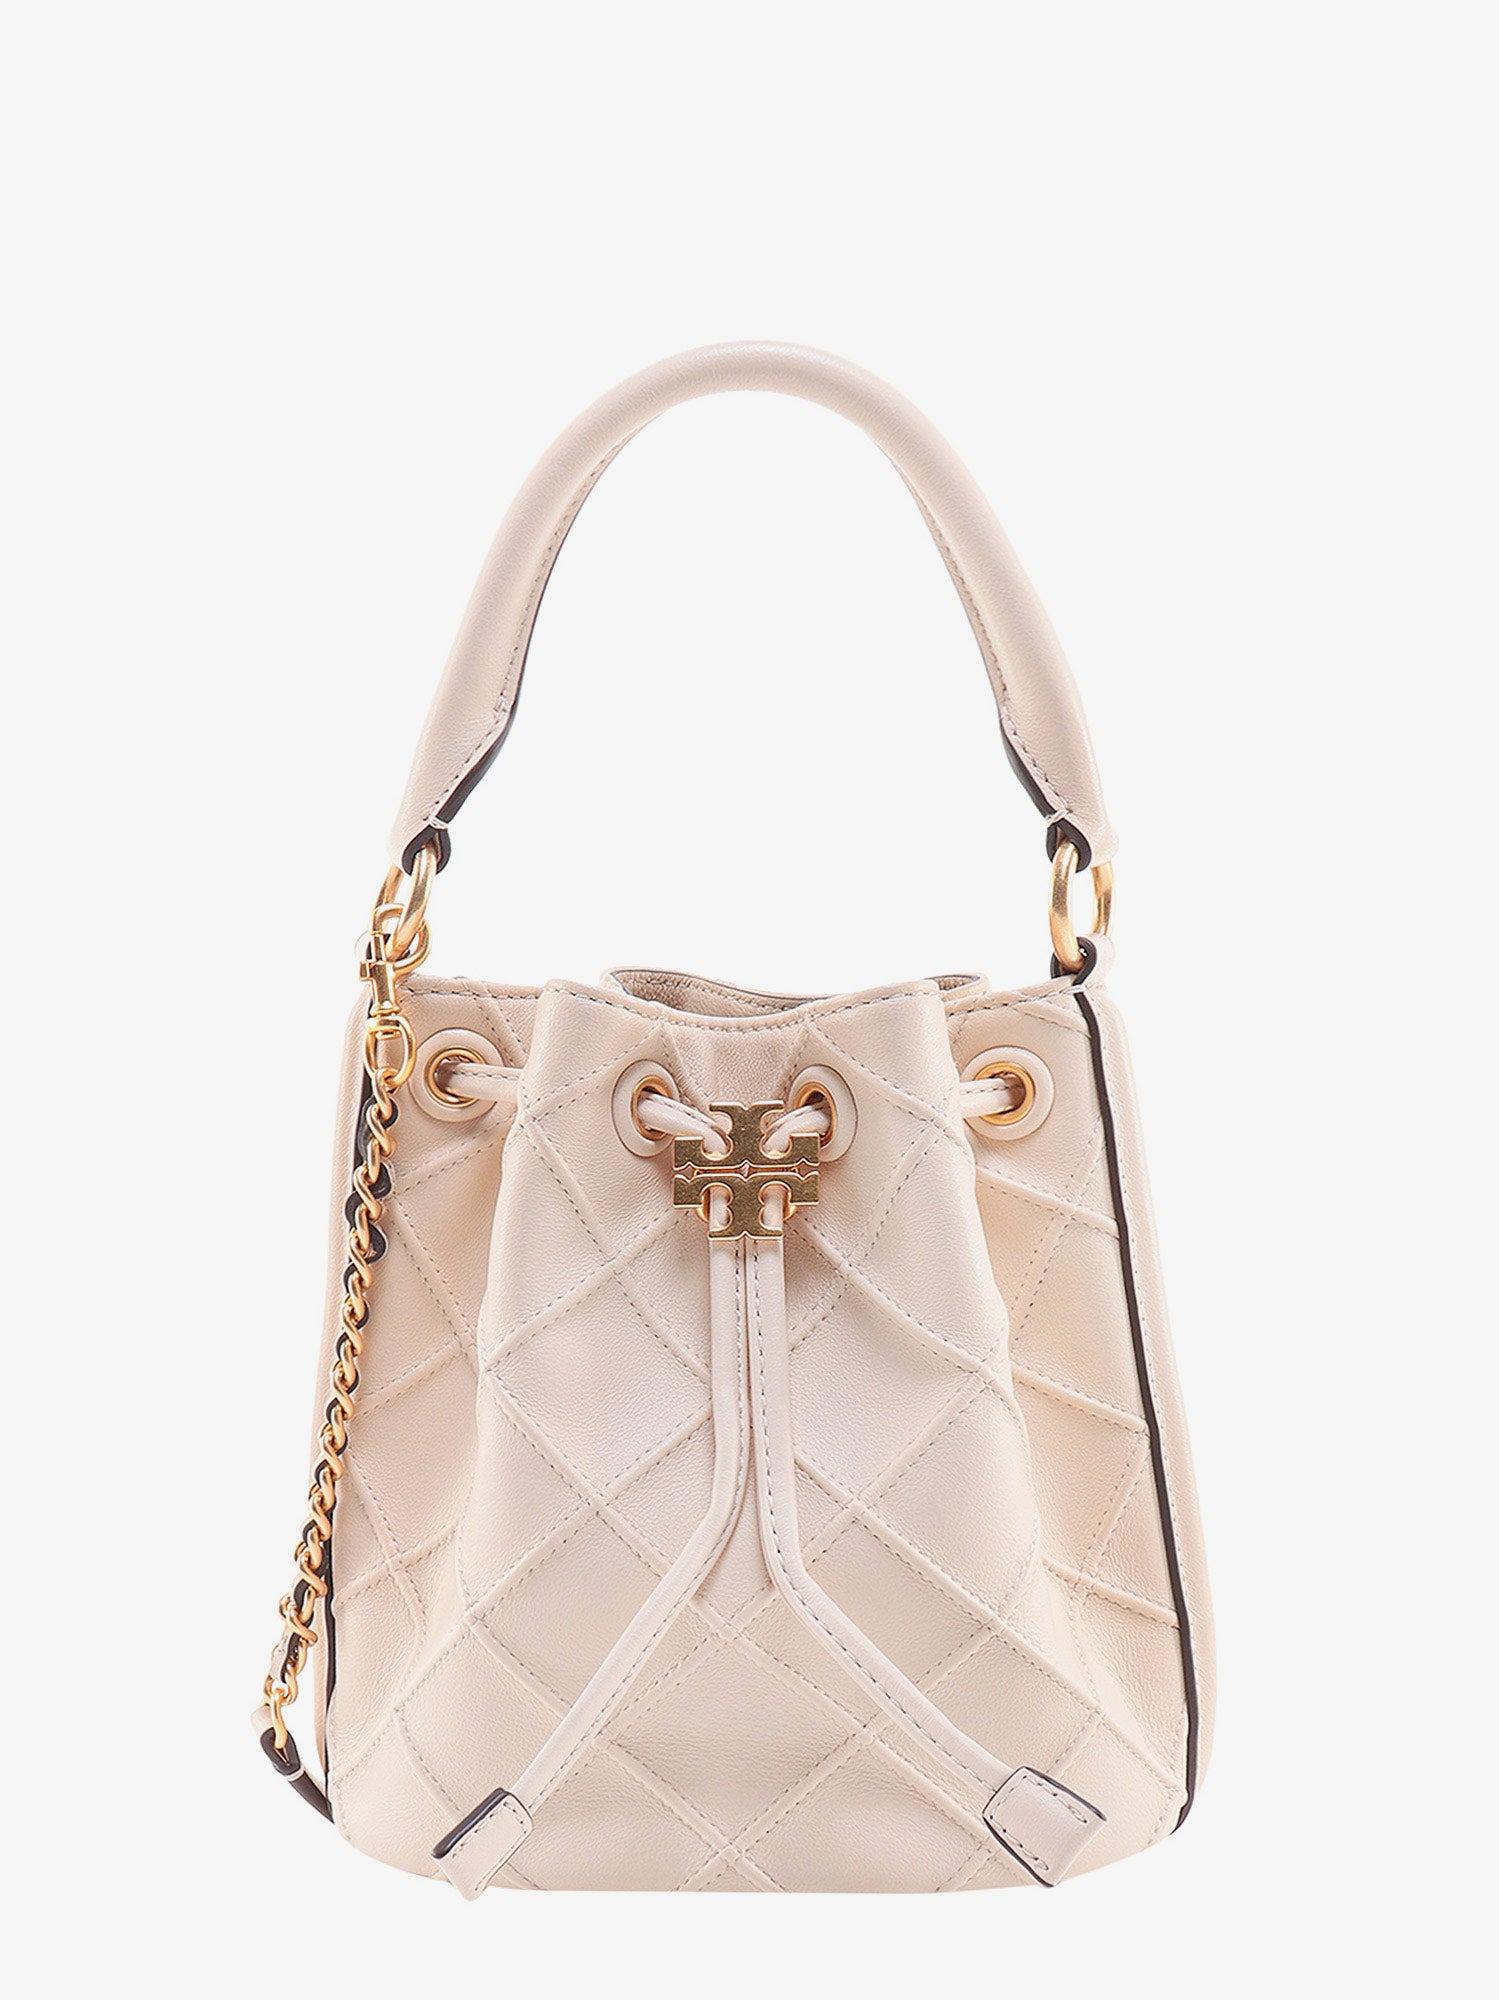 Tory Burch Bucket Bag in Natural | Lyst